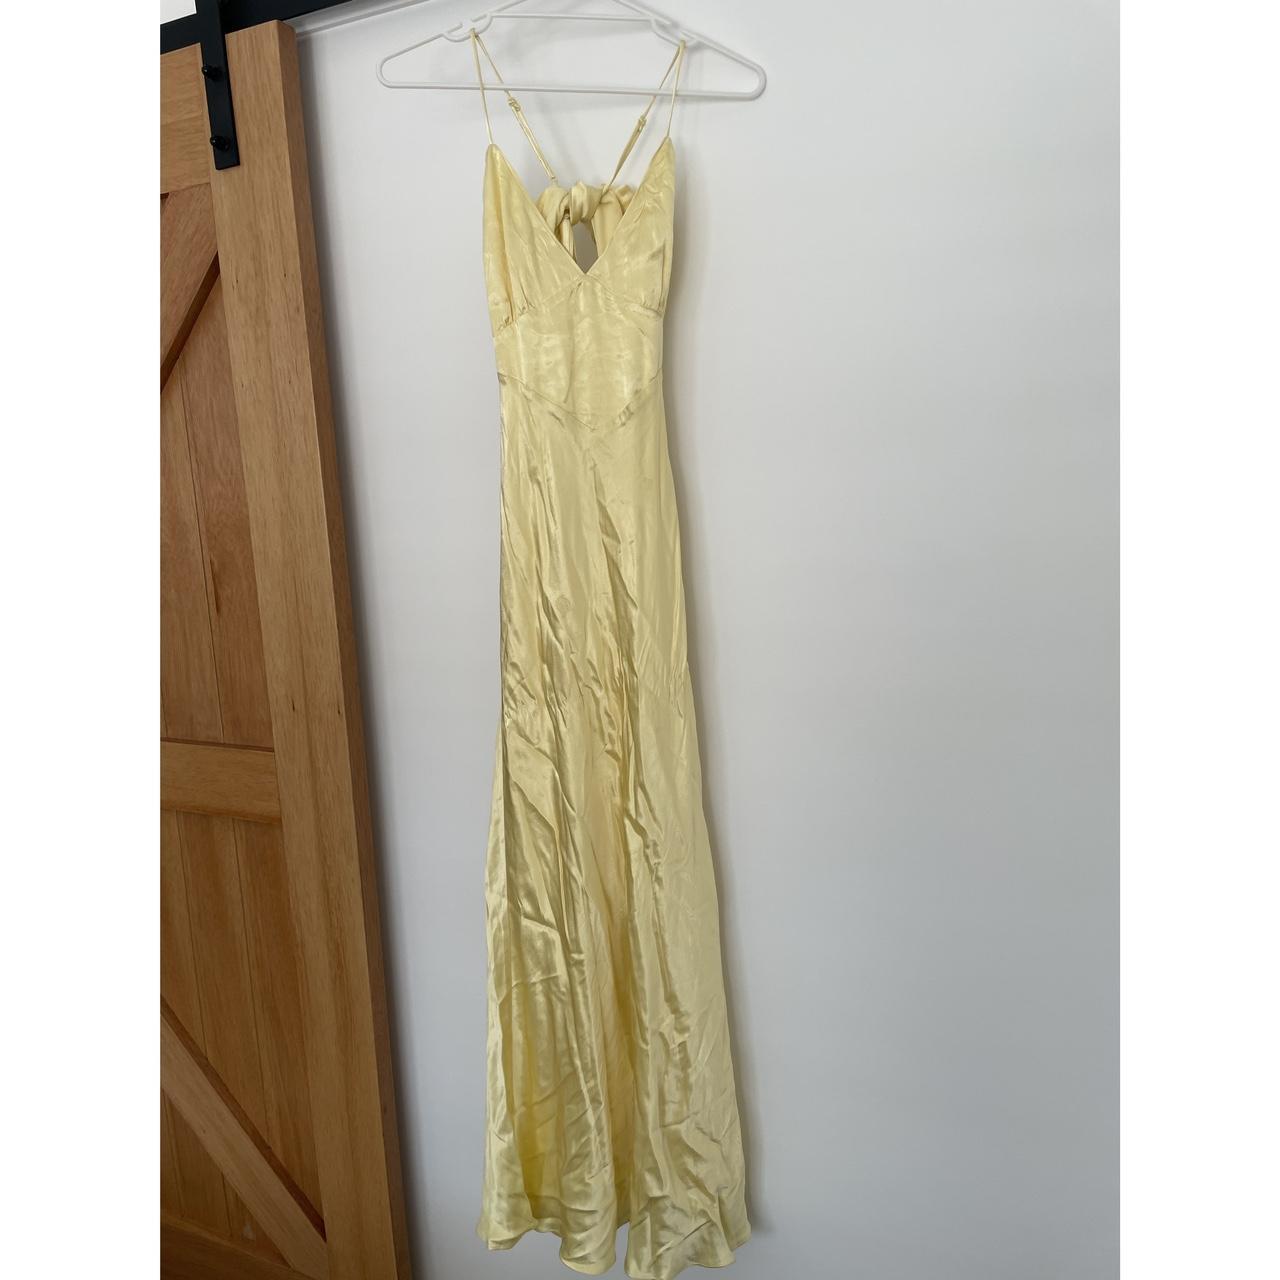 Stunning yellow maxi dress with back bow detail from... - Depop